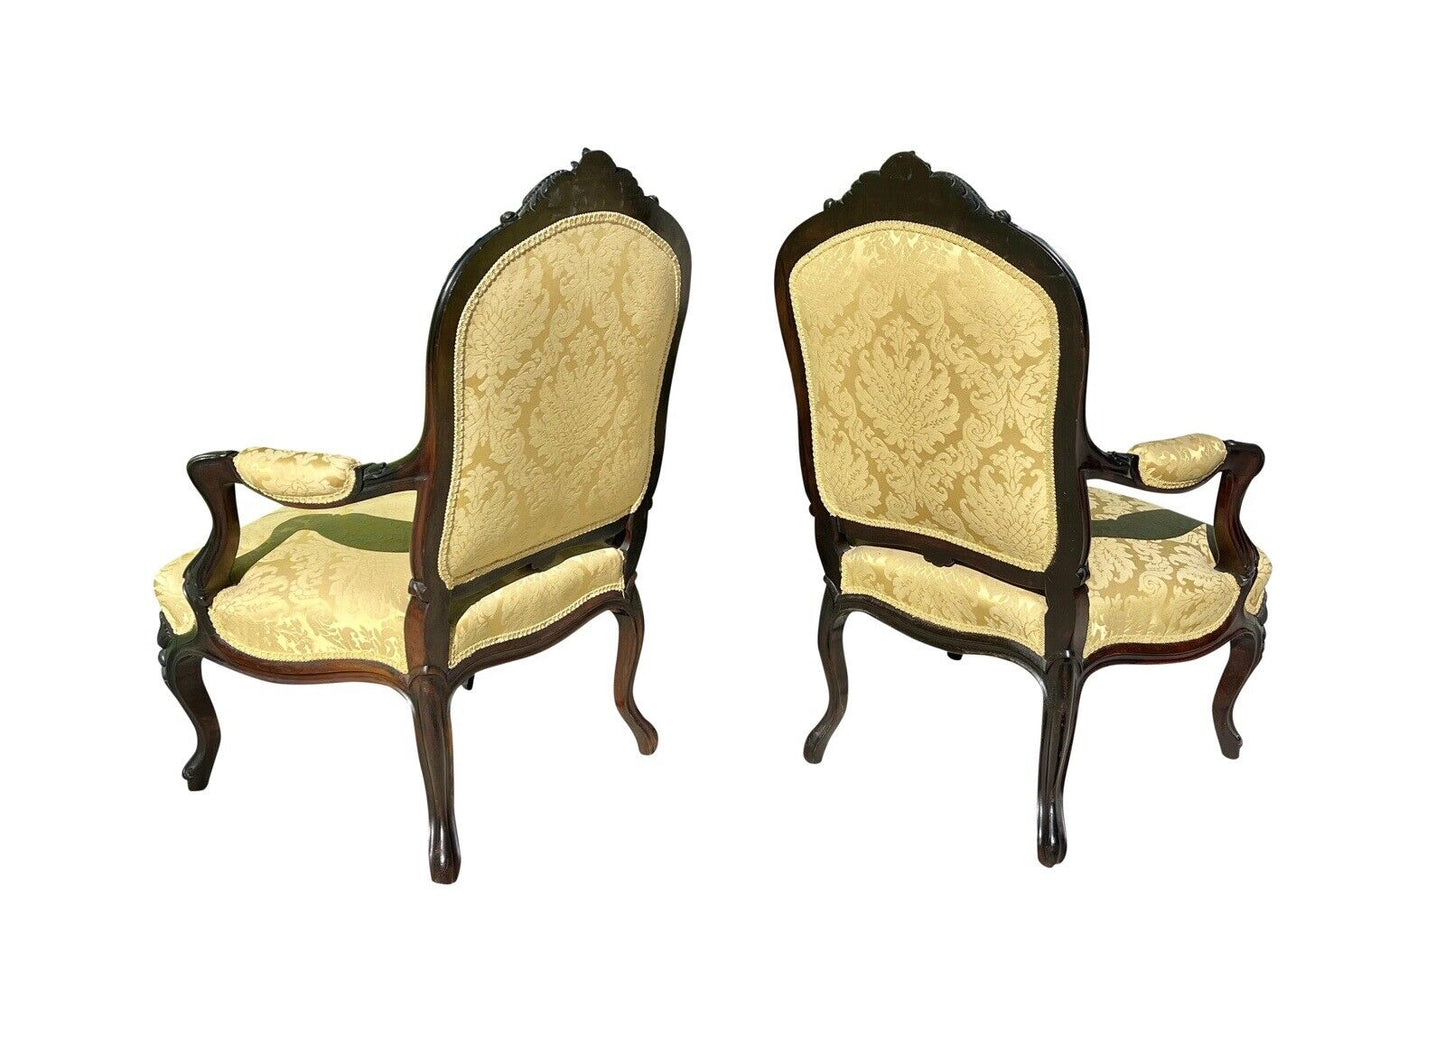 Pair of Louis Xiv Ebonized Rosewood Fauteuil a La Reine Arm Chairs in Satin Gold